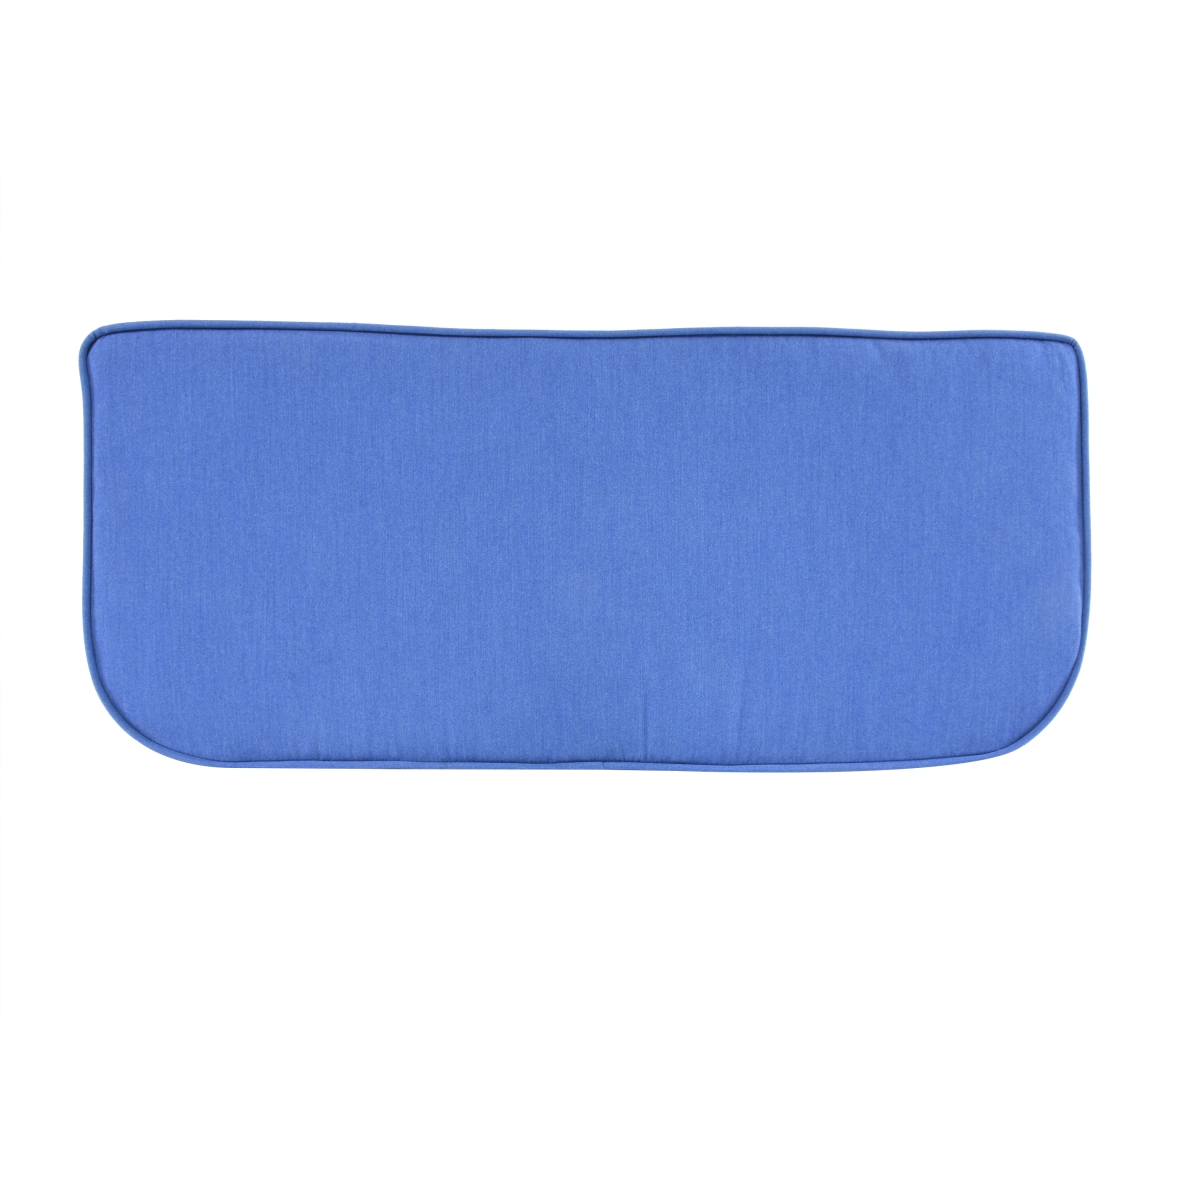 Cuws41-sda93 18 X 41.5 In. Pacifica Premium Double Welt Settee Seat Cushion In Lapis